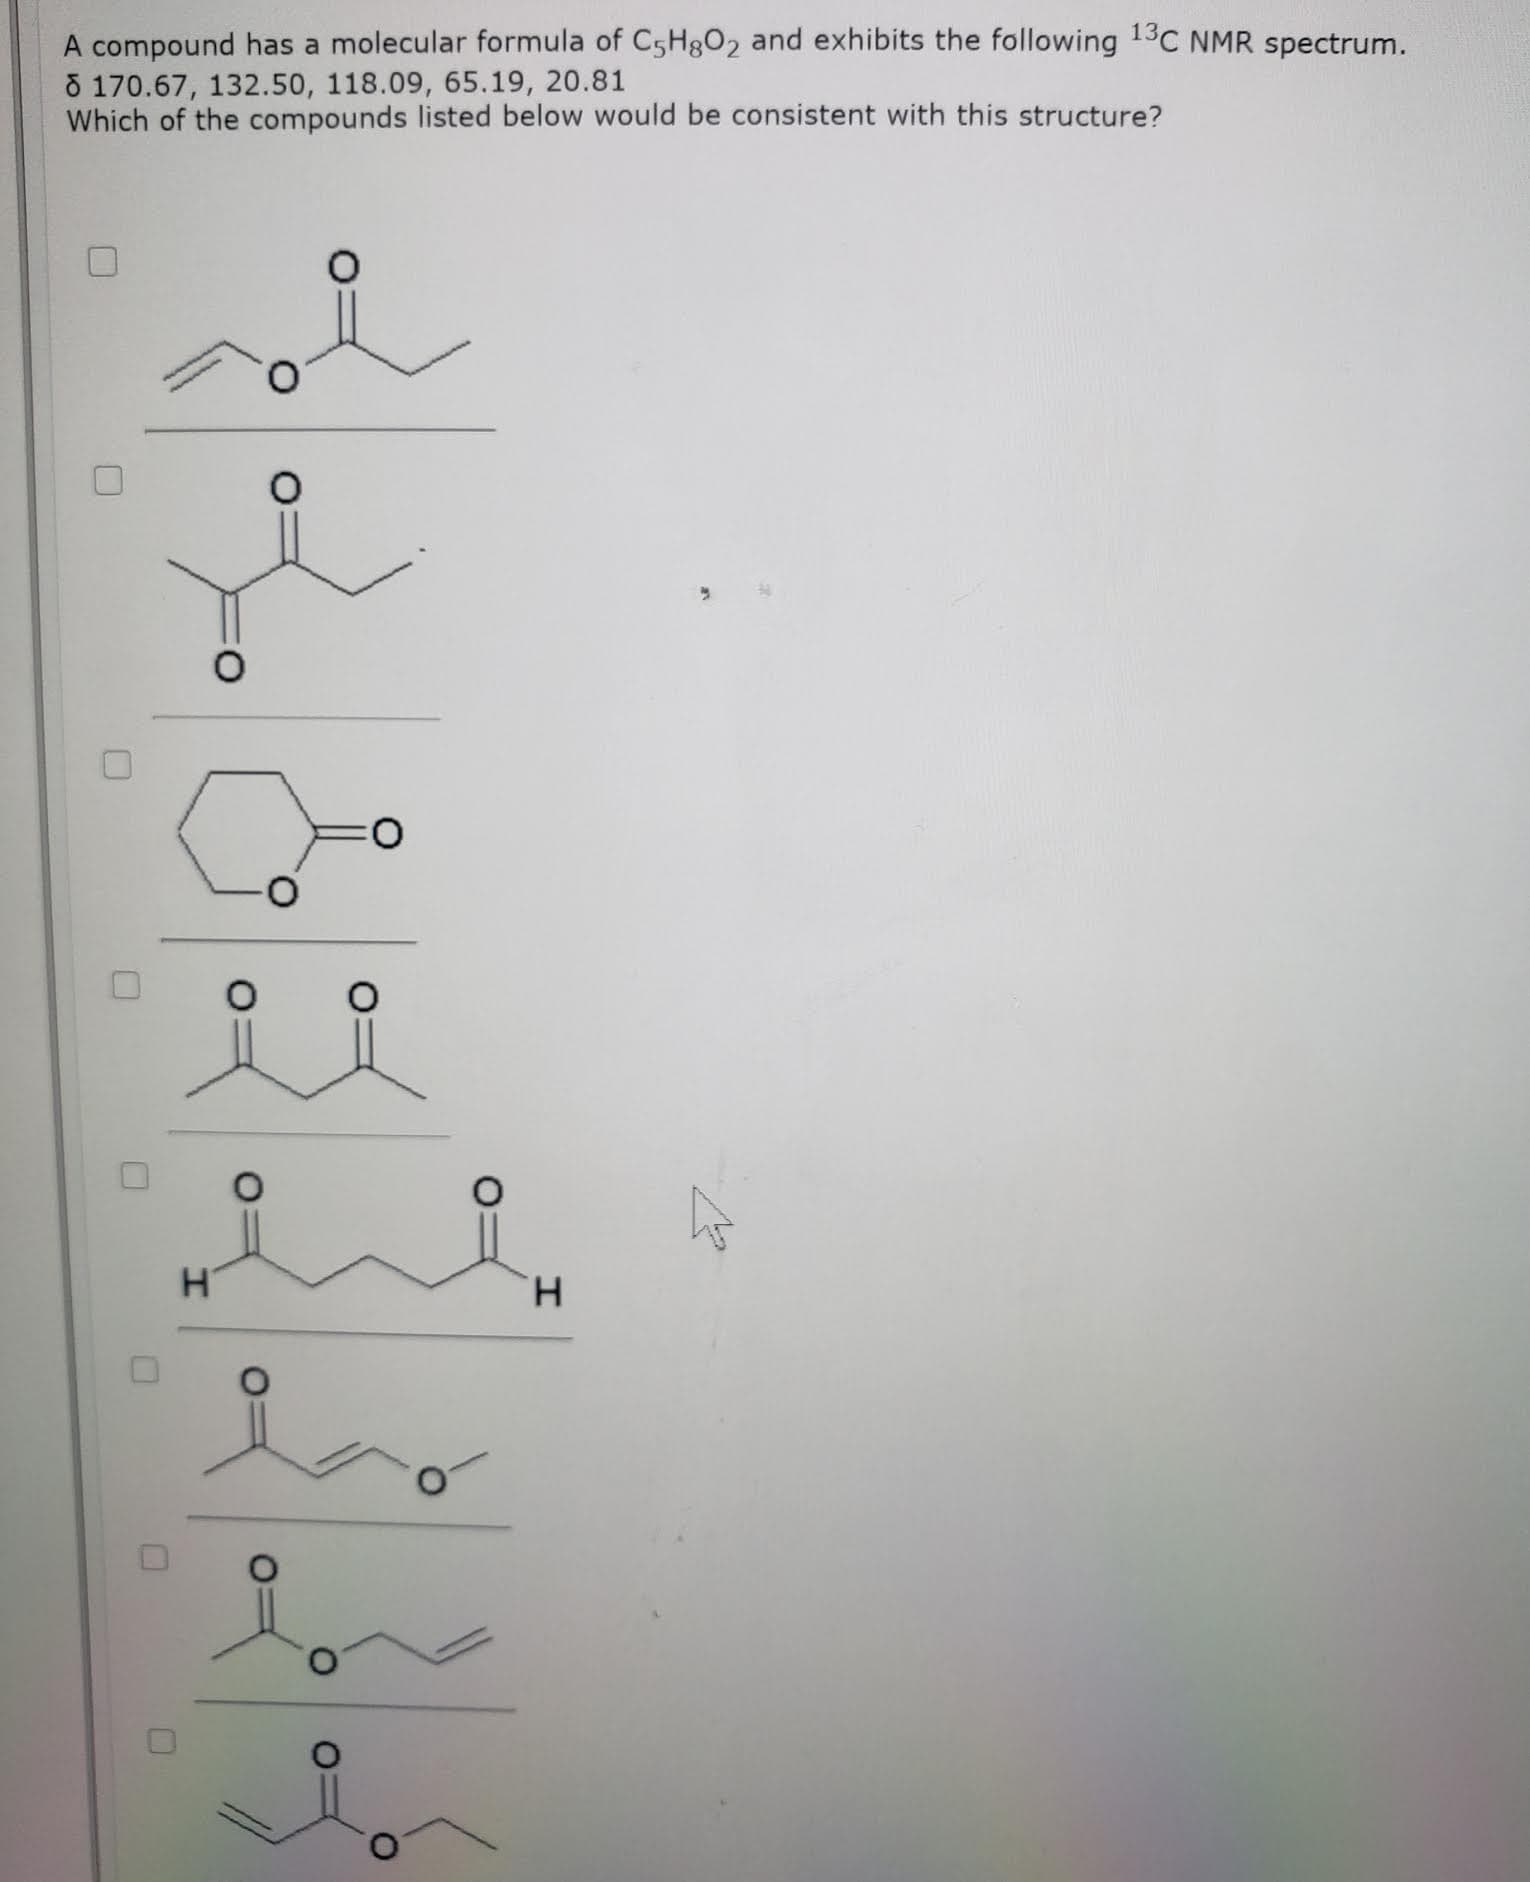 A compound has a molecular formula of C5H3O2 and exhibits the following 13C NMR spectrum.
8 170.67, 132.50, 118.09, 65.19, 20.81
Which of the compounds listed below would be consistent with this structure?
H.
